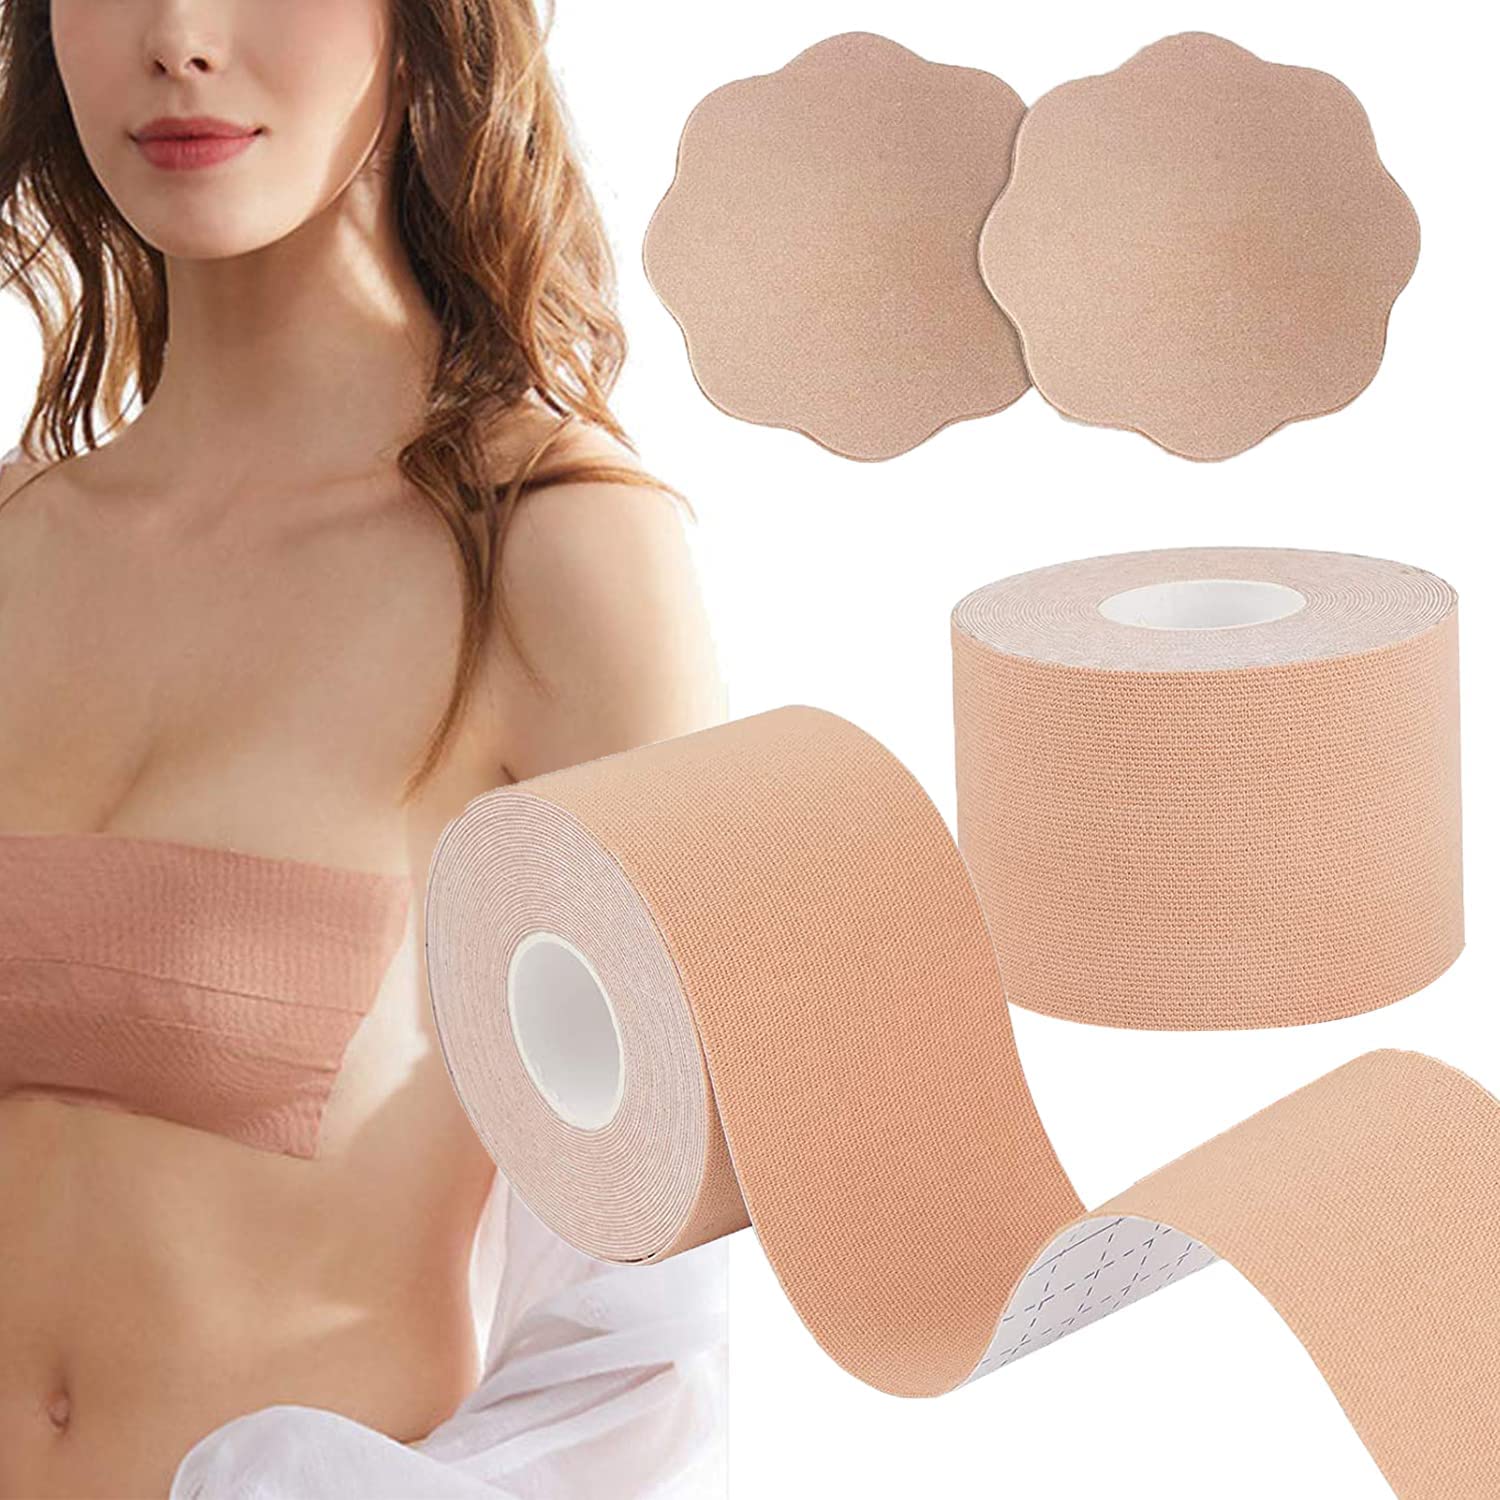 Does the boob tape harm the skin? Boob Tape Manufacturer